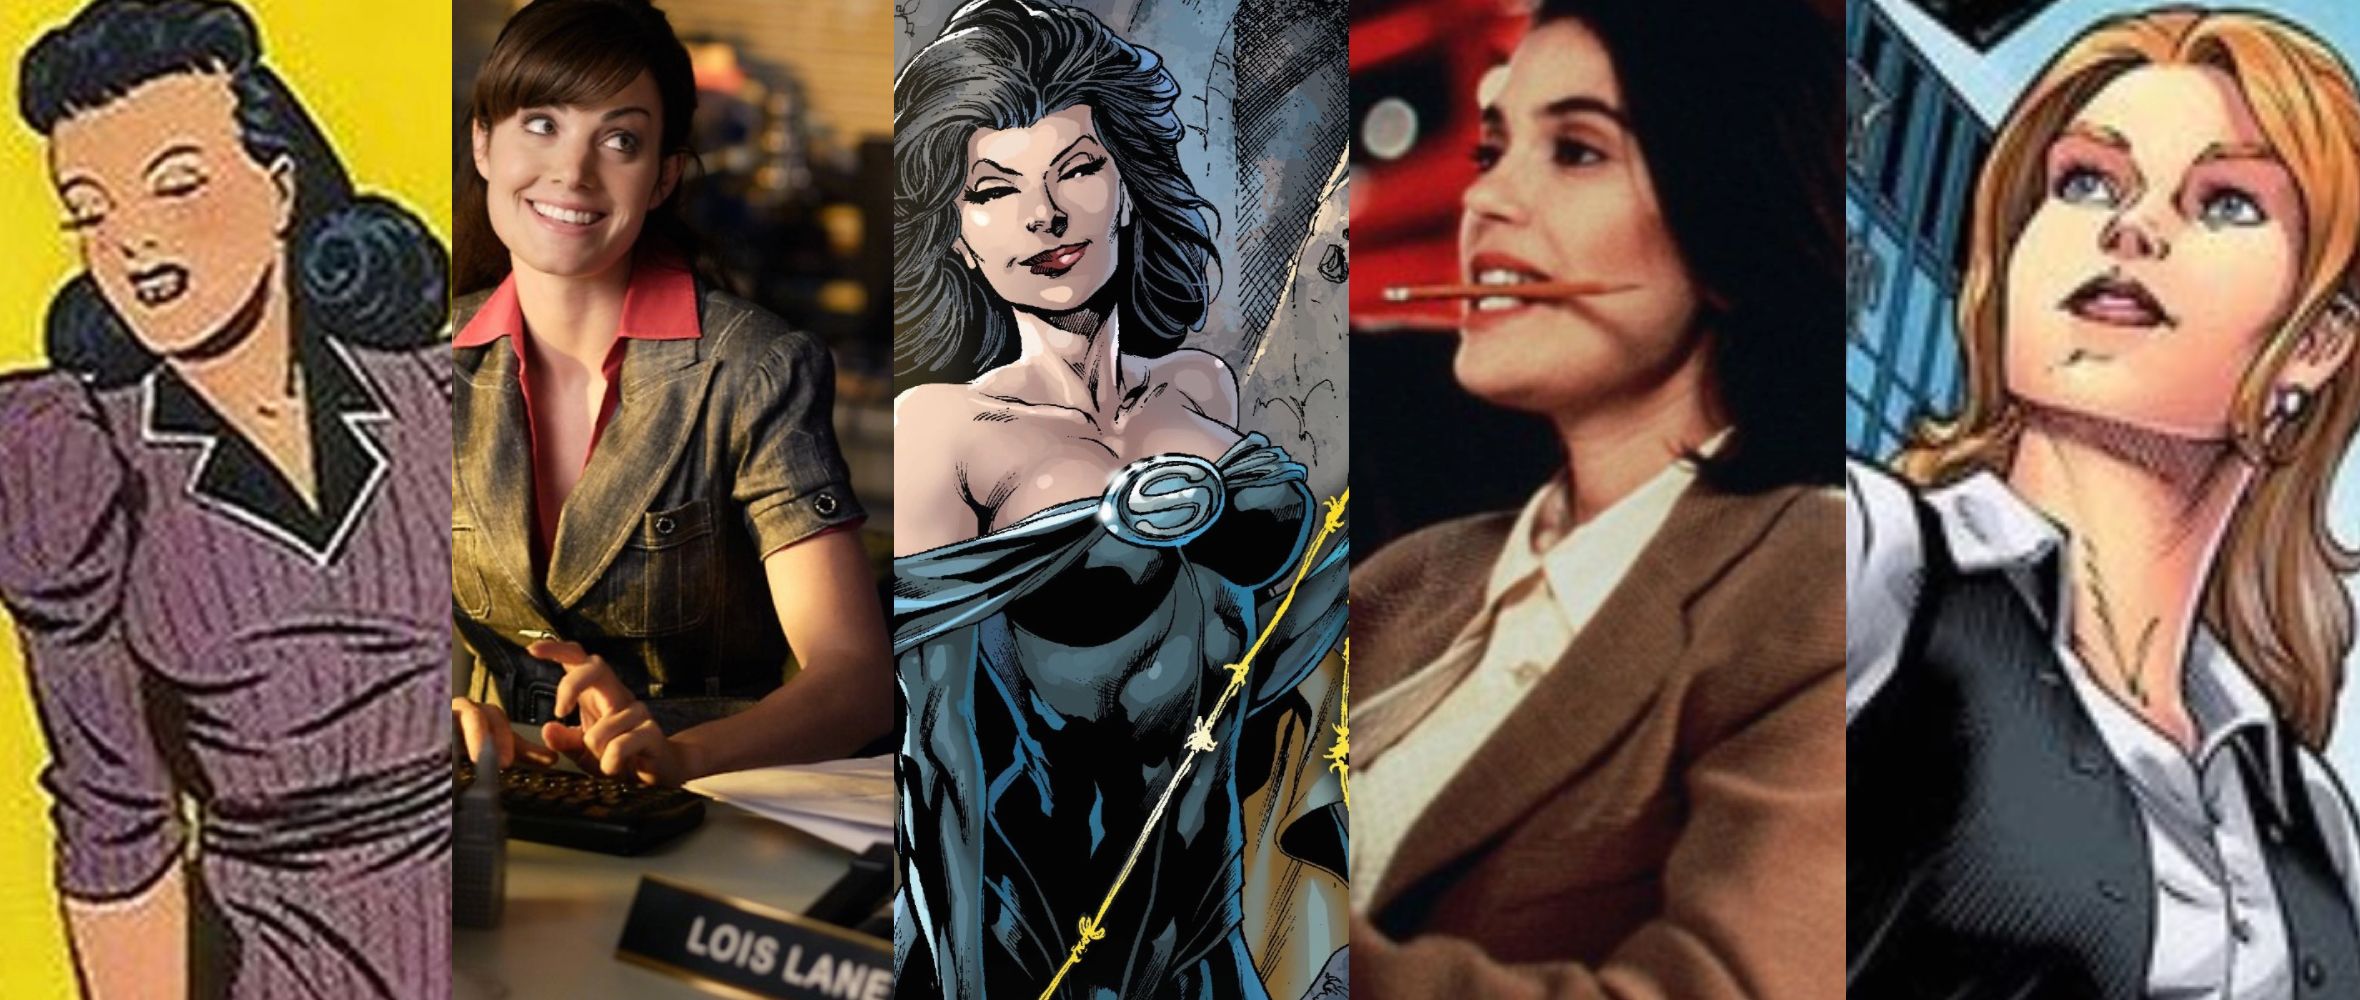 Lois Lane In DC Comics Multiverse And Live Action